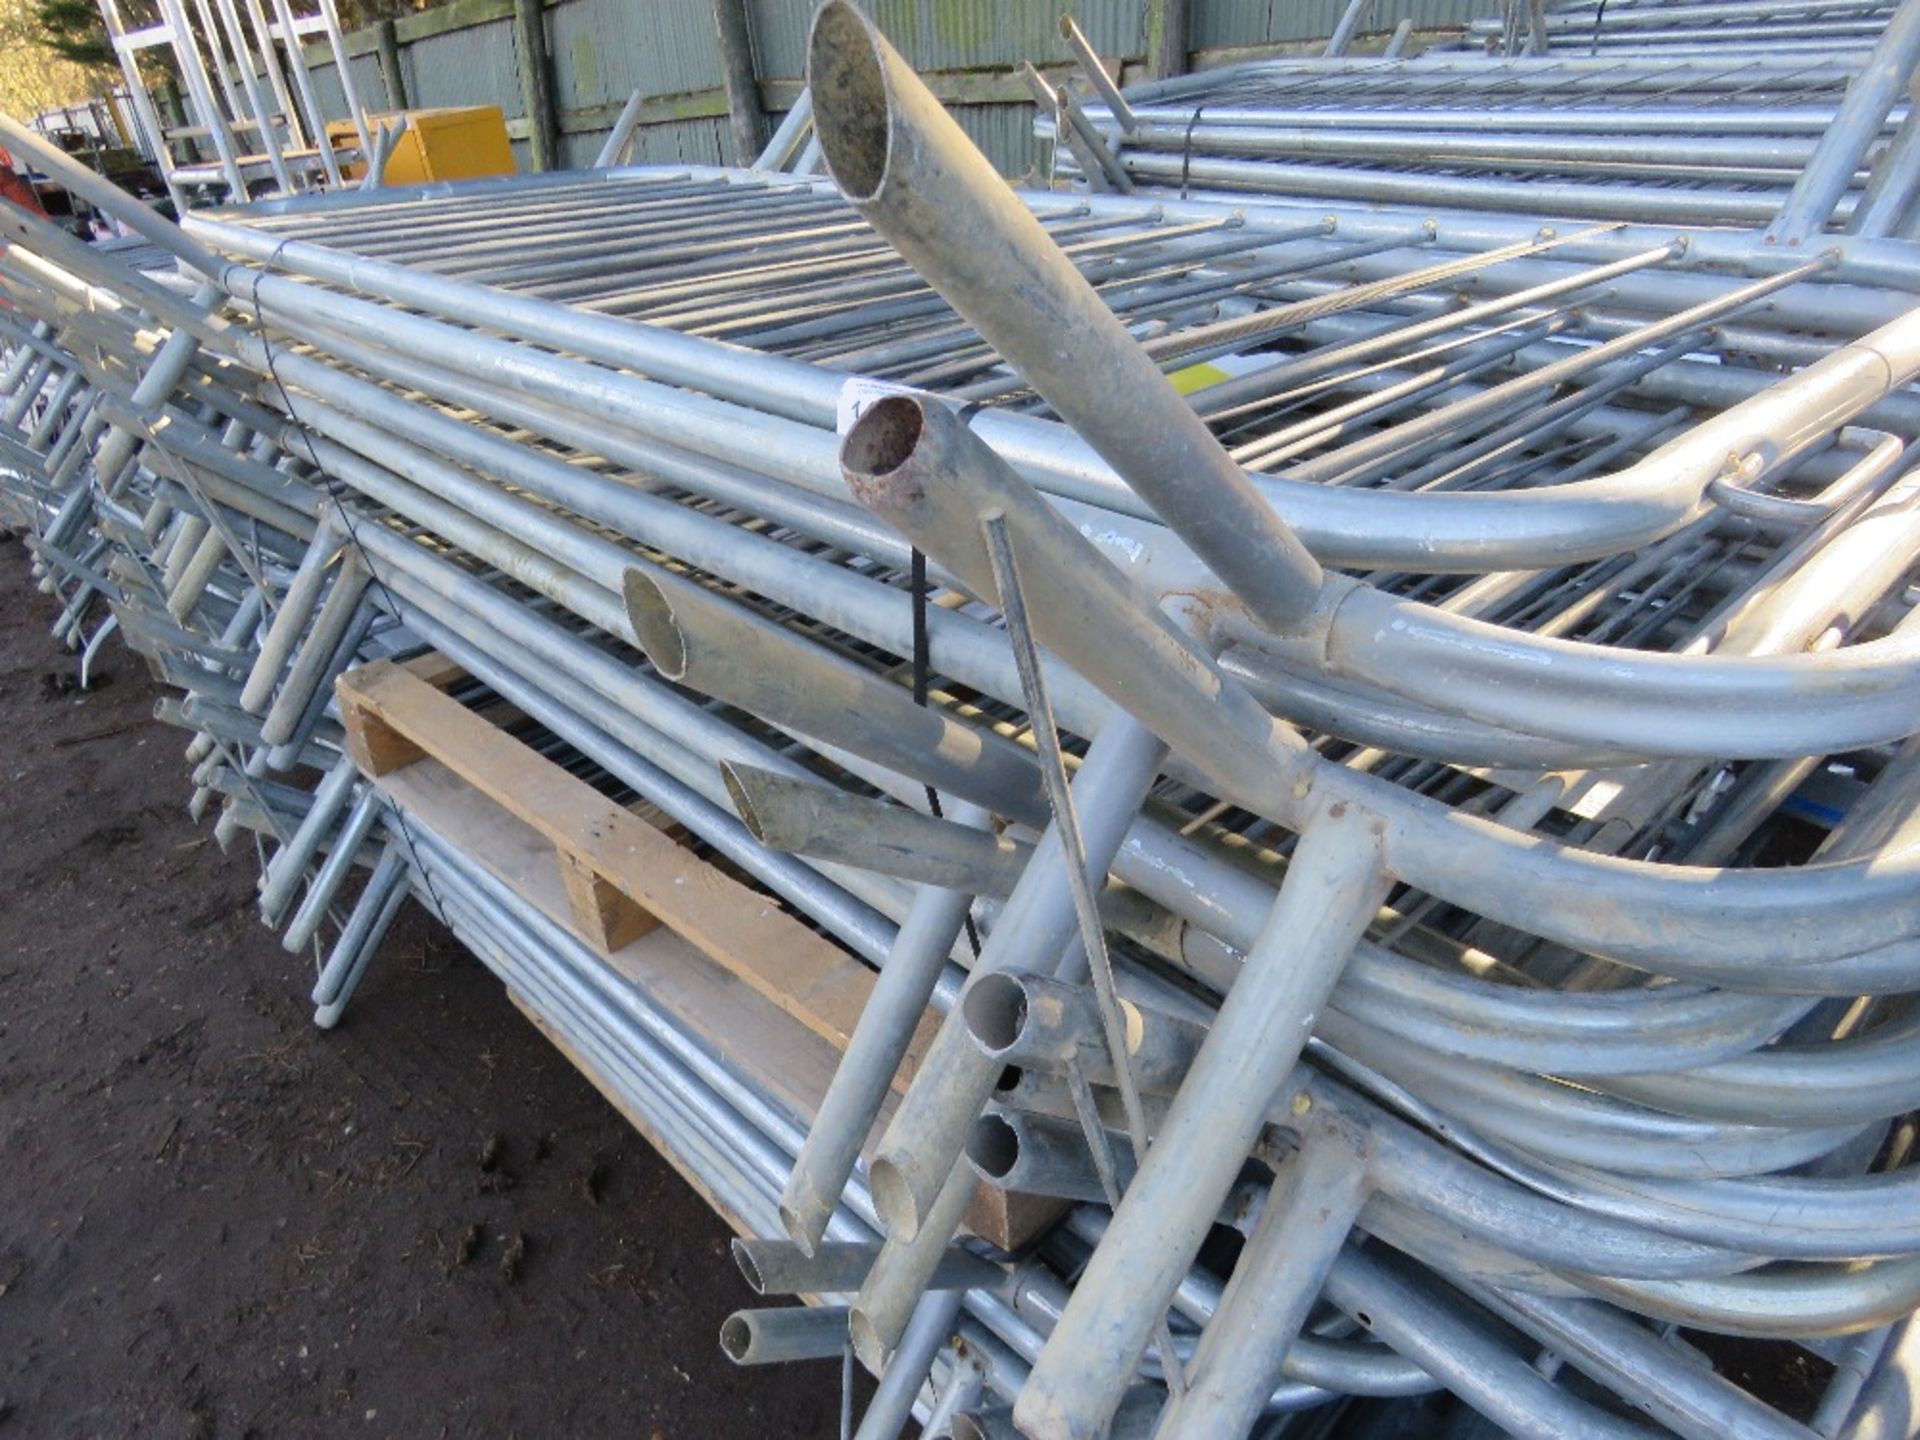 BUNDLE CONTAINING 15NO QUALITY GALVANISED CROWD BARRIERS, MAINLY SMARTWELD BRAND. MANY APPEAR UNUSED - Image 3 of 3